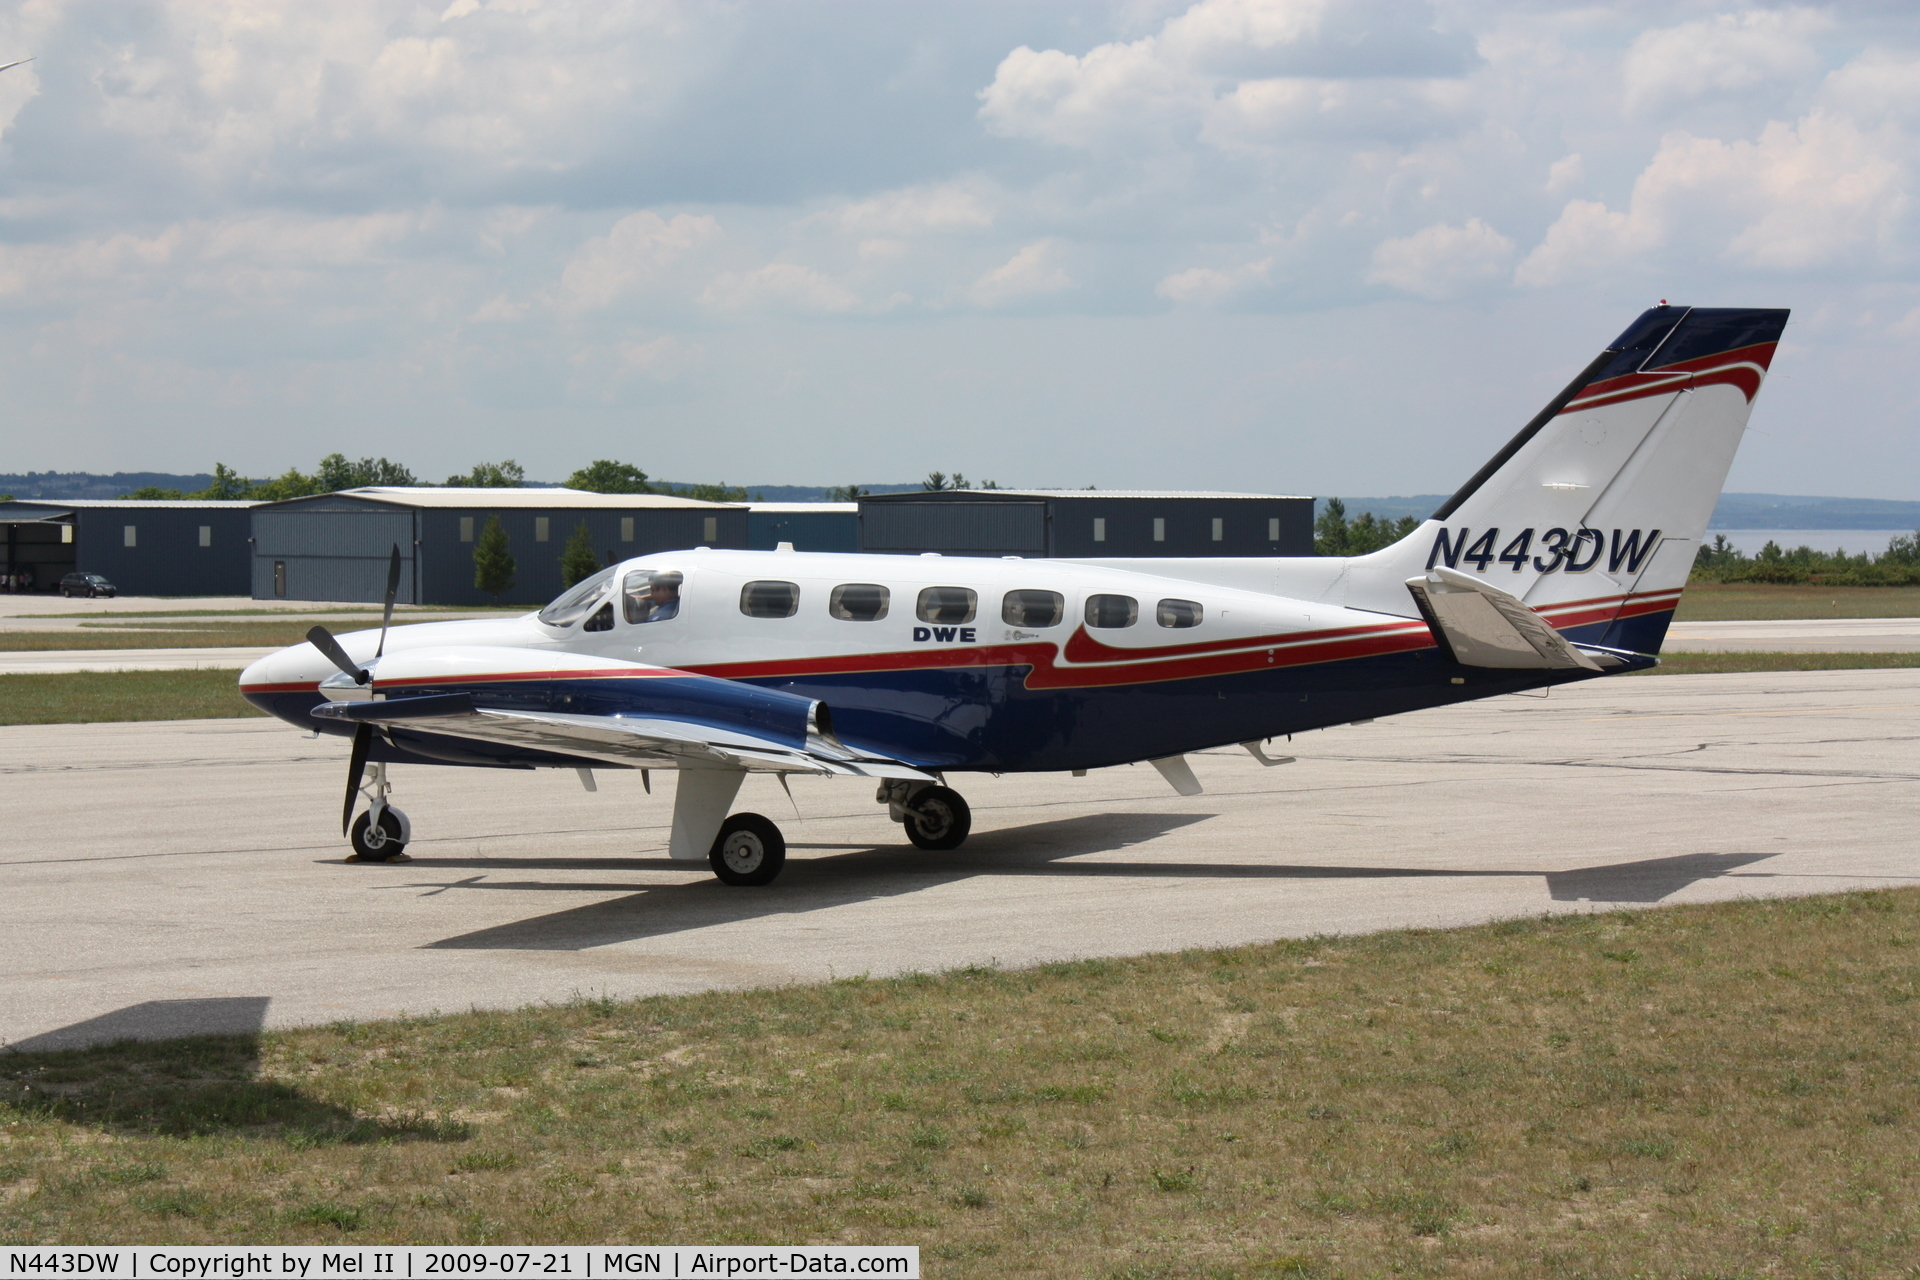 N443DW, 1983 Cessna 441 Conquest II C/N 441-0313, Parked